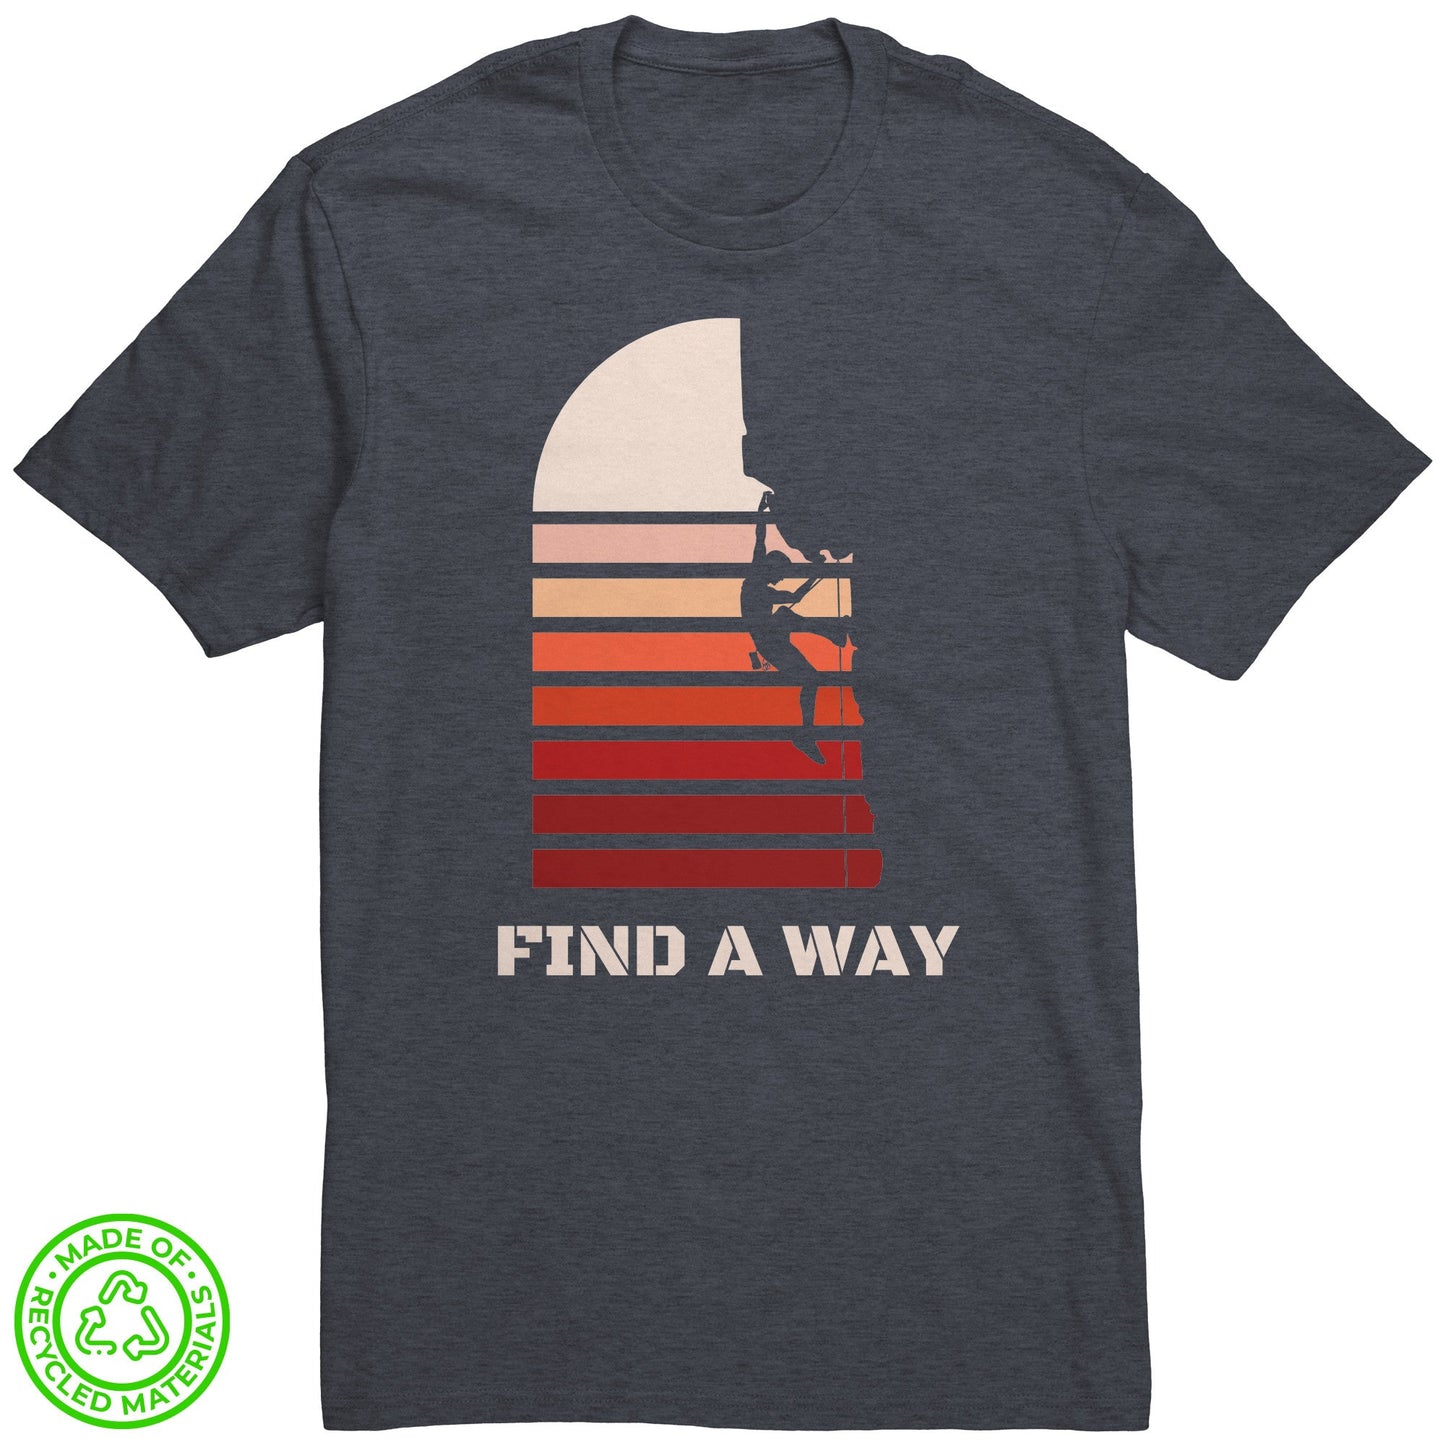 Eco-friendly Re-Tee (Find a way)